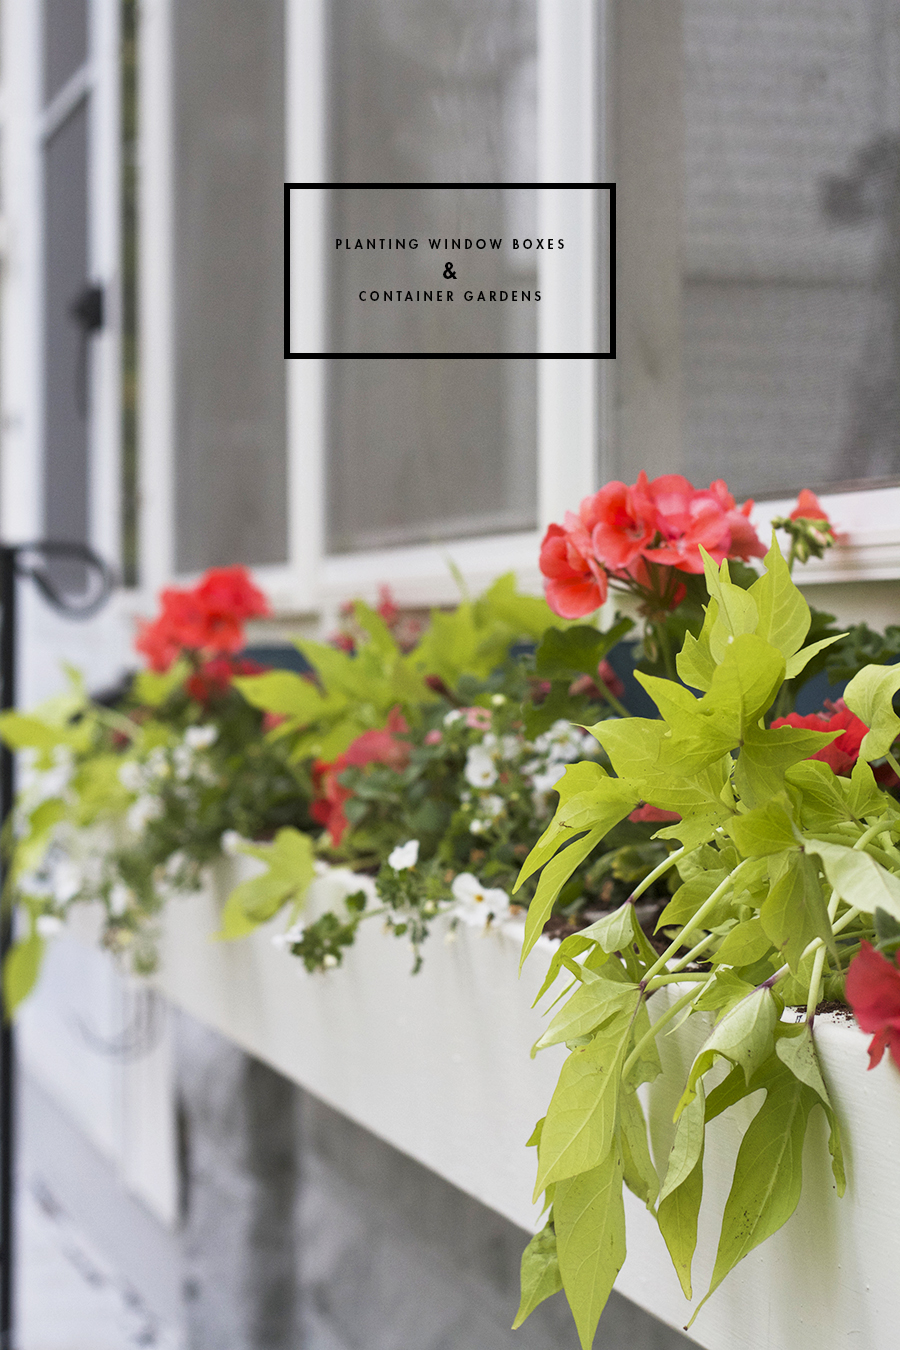 How to Plant Window Box & Container Gardens